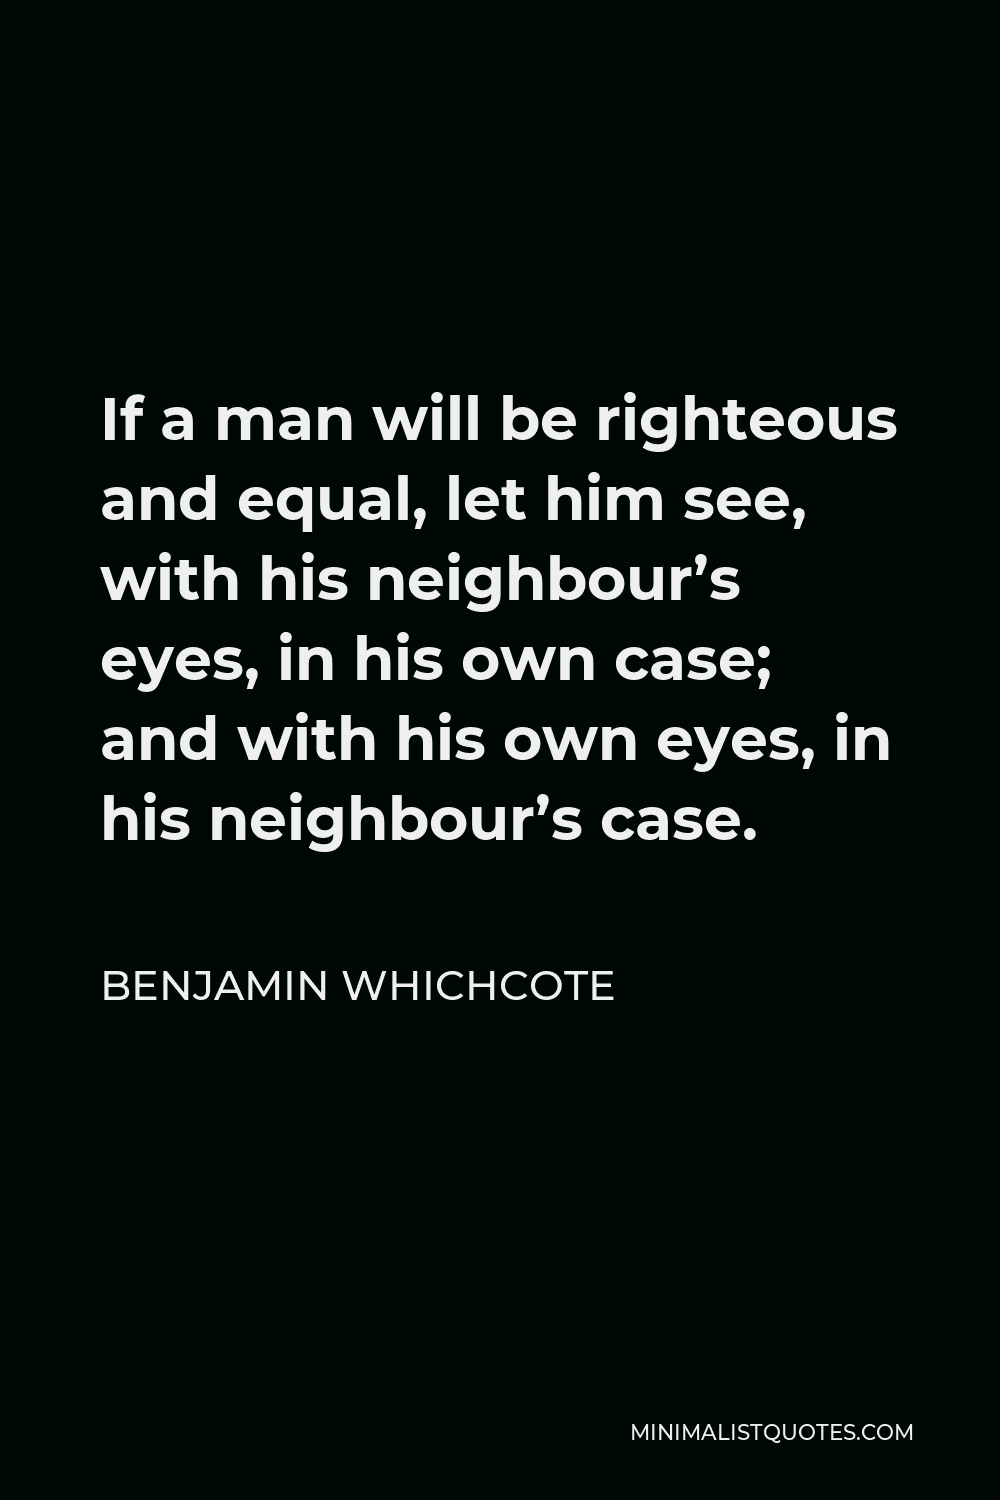 Benjamin Whichcote Quote - If a man will be righteous and equal, let him see, with his neighbour’s eyes, in his own case; and with his own eyes, in his neighbour’s case.